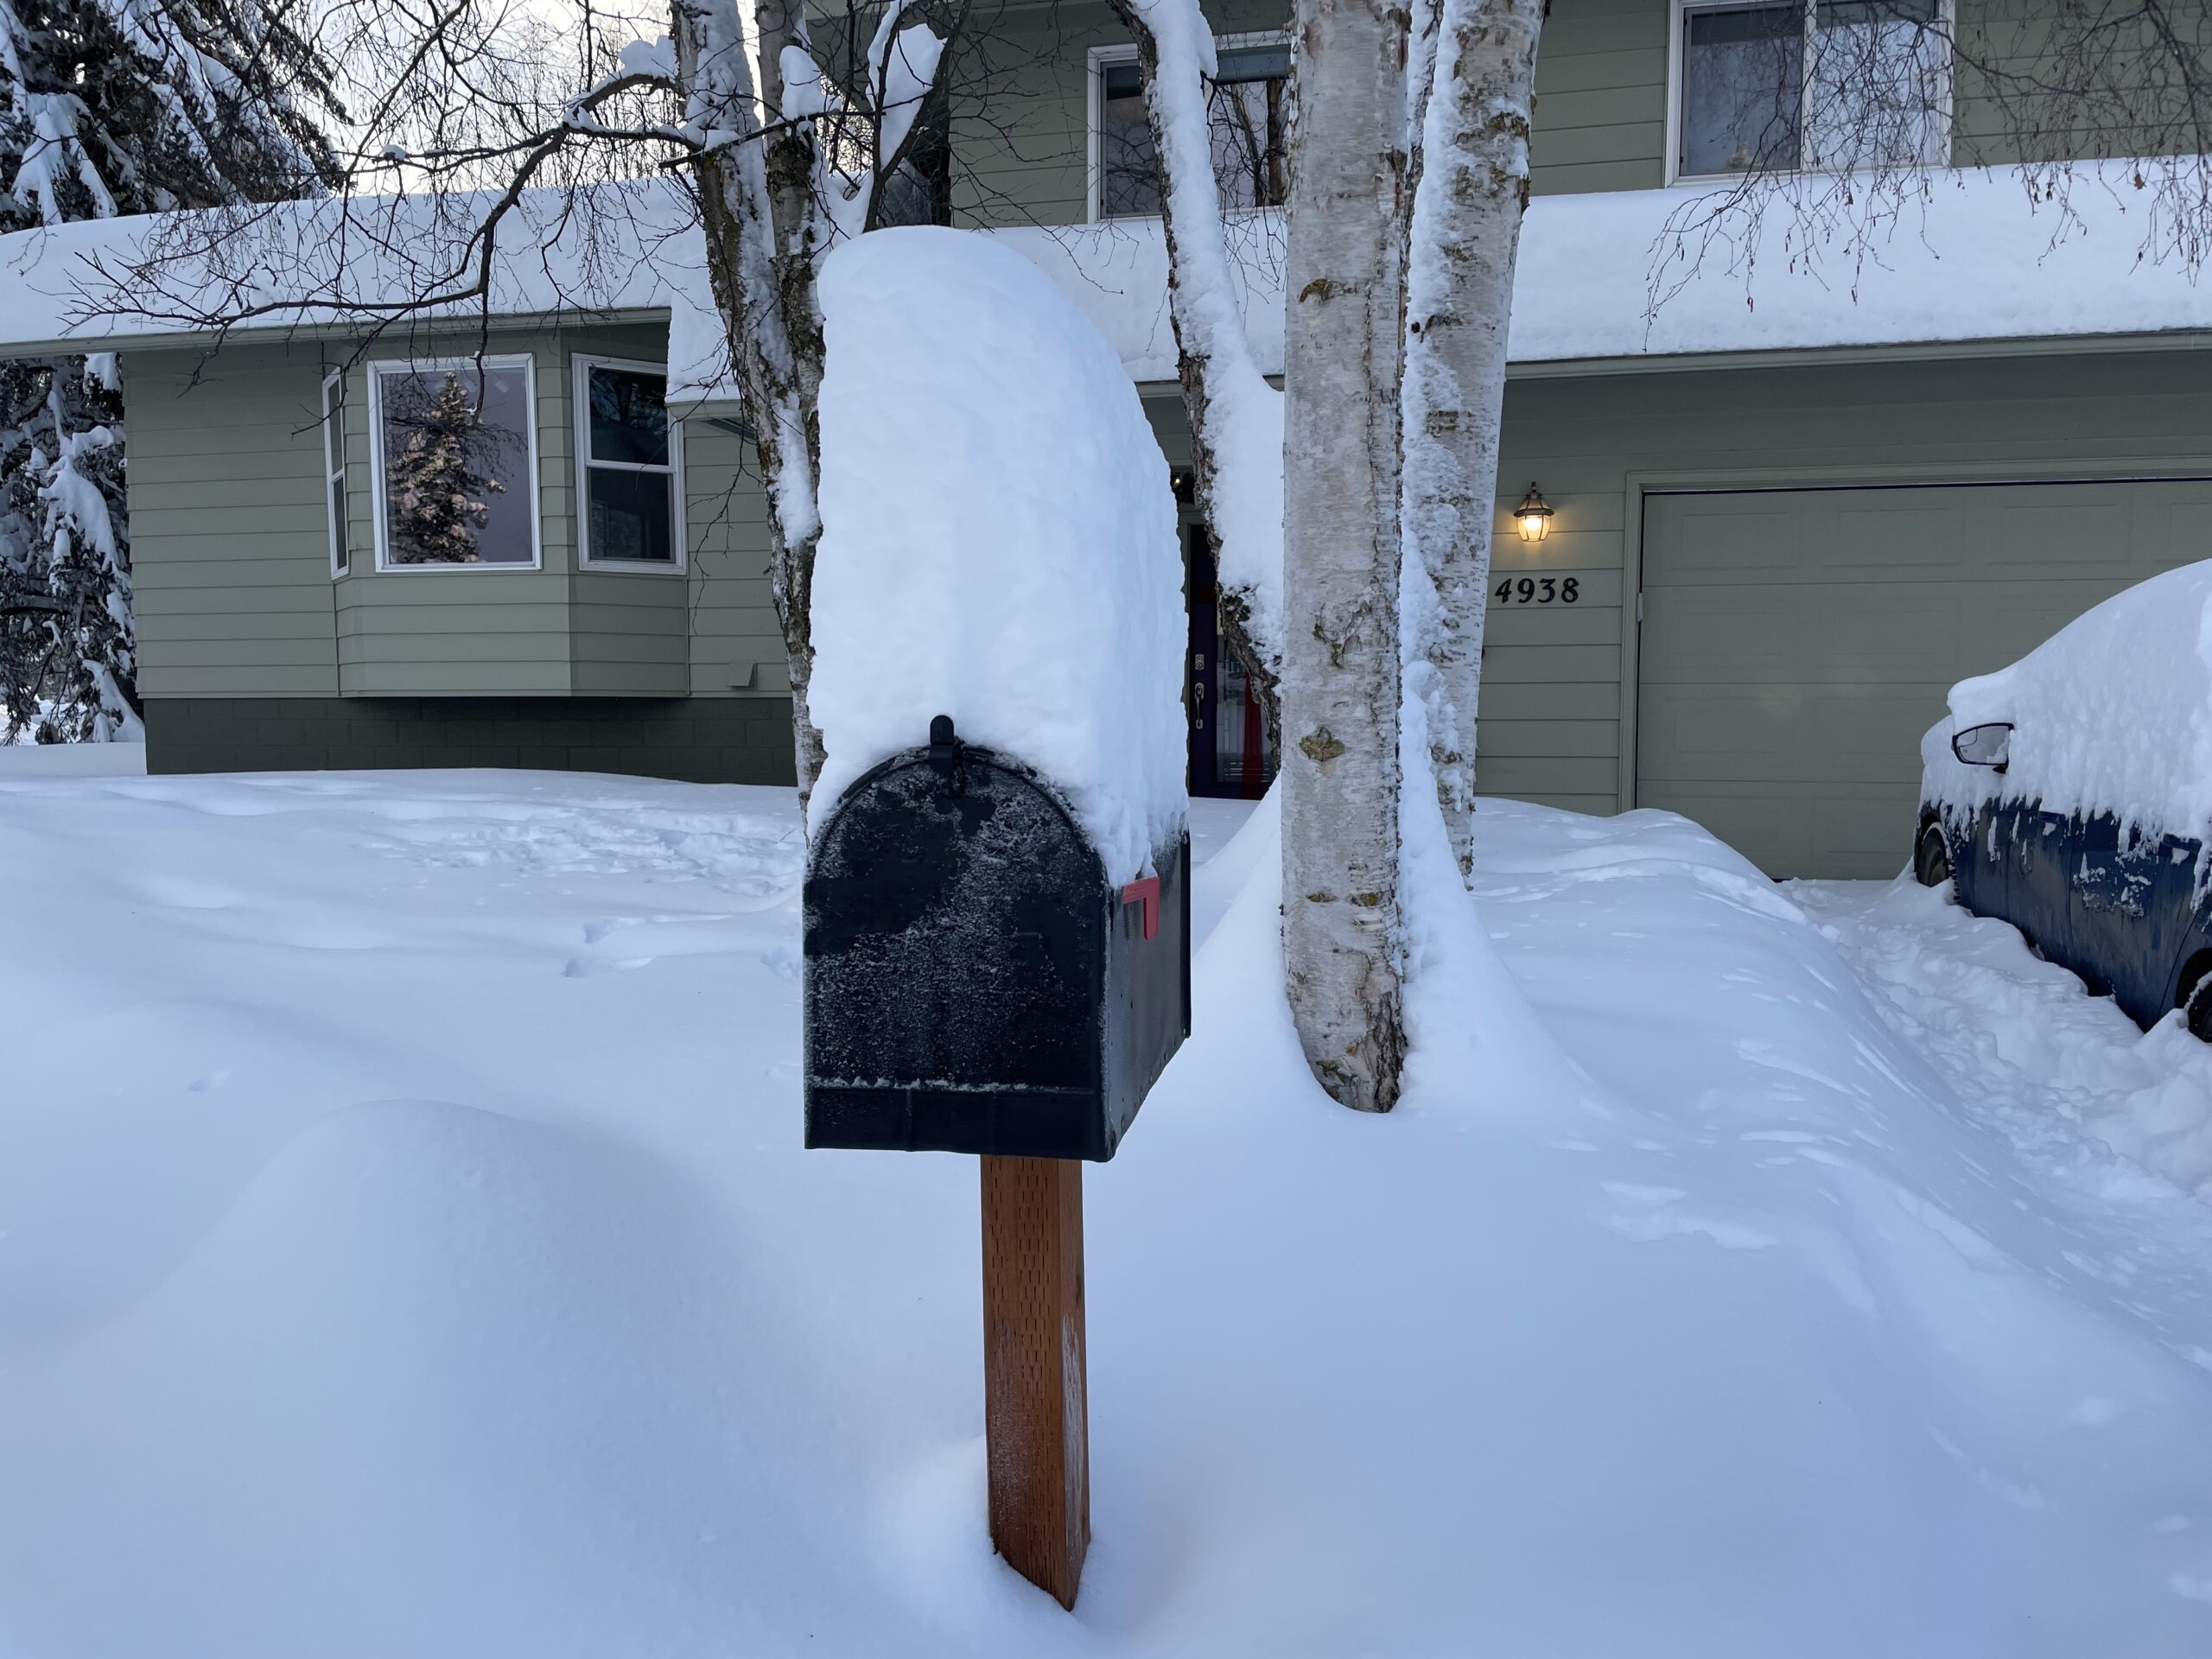 About a foot of snow piles up on a mailbox in Anchorage